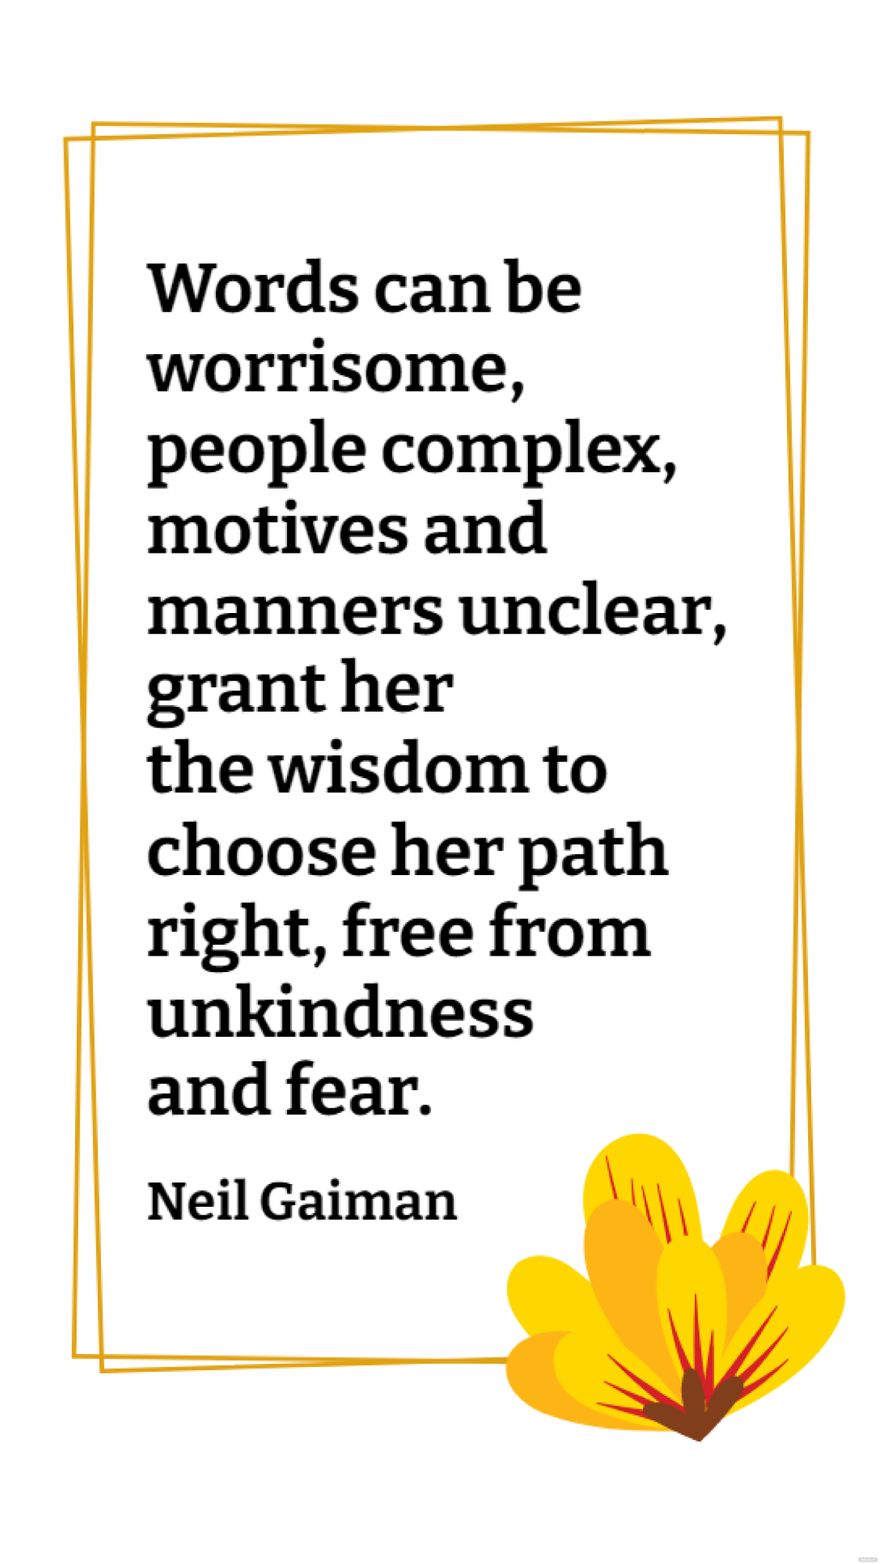 Neil Gaiman - Words can be worrisome, people complex, motives and manners unclear, grant her the wisdom to choose her path right, free from unkindness and fear.